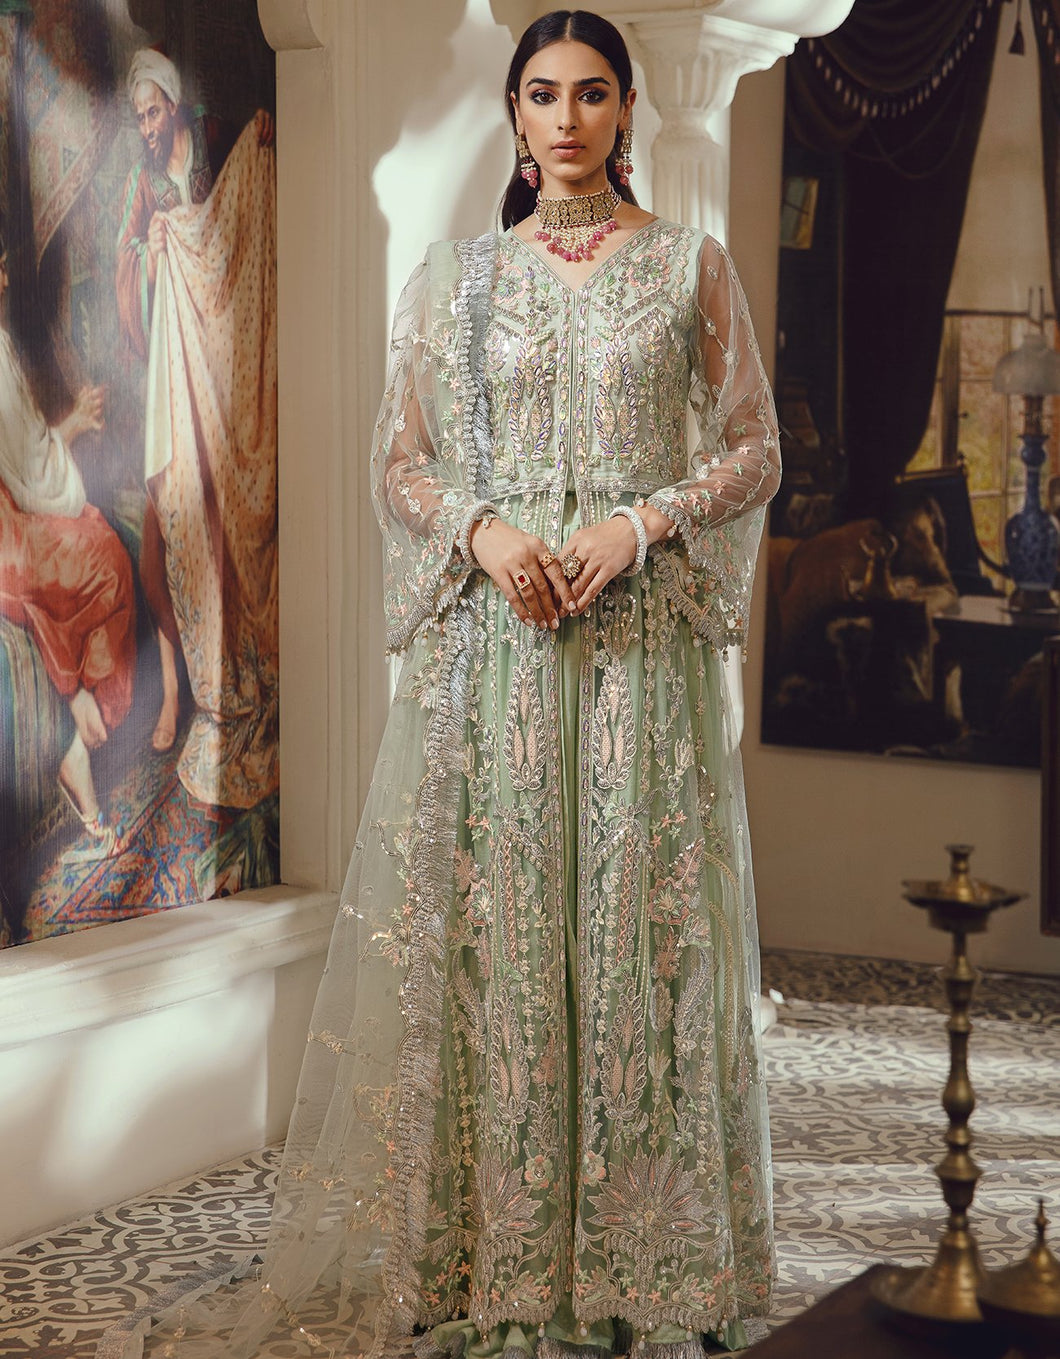 Buy EMAAN ADEEL | BELLE ROBE | VOL 2 | BL-03 Green @LebaasOnline Net Embroidered had mirror work, New Indian & Pakistani Designer Partywear Suits at our DESIGNER BOUTIQUE UK is available with us. INDIAN BRIDAL DRESSES ONLINE USA can be easily customized for evening/party wear. Get PAKISTANI DESIGNER DRESSES in USA